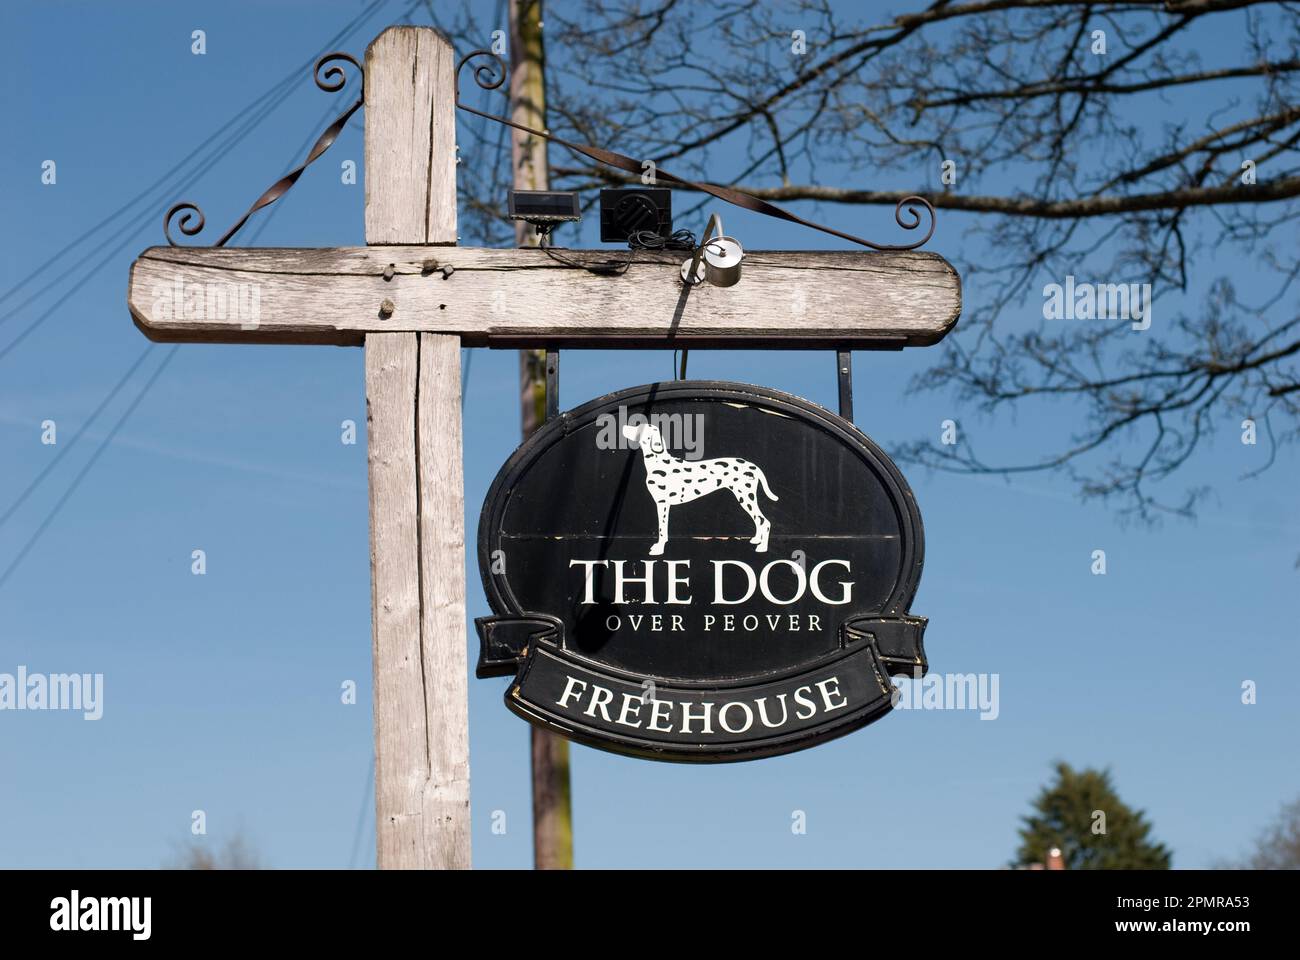 Le Dog Inn à Over Peover, Cheshire Banque D'Images